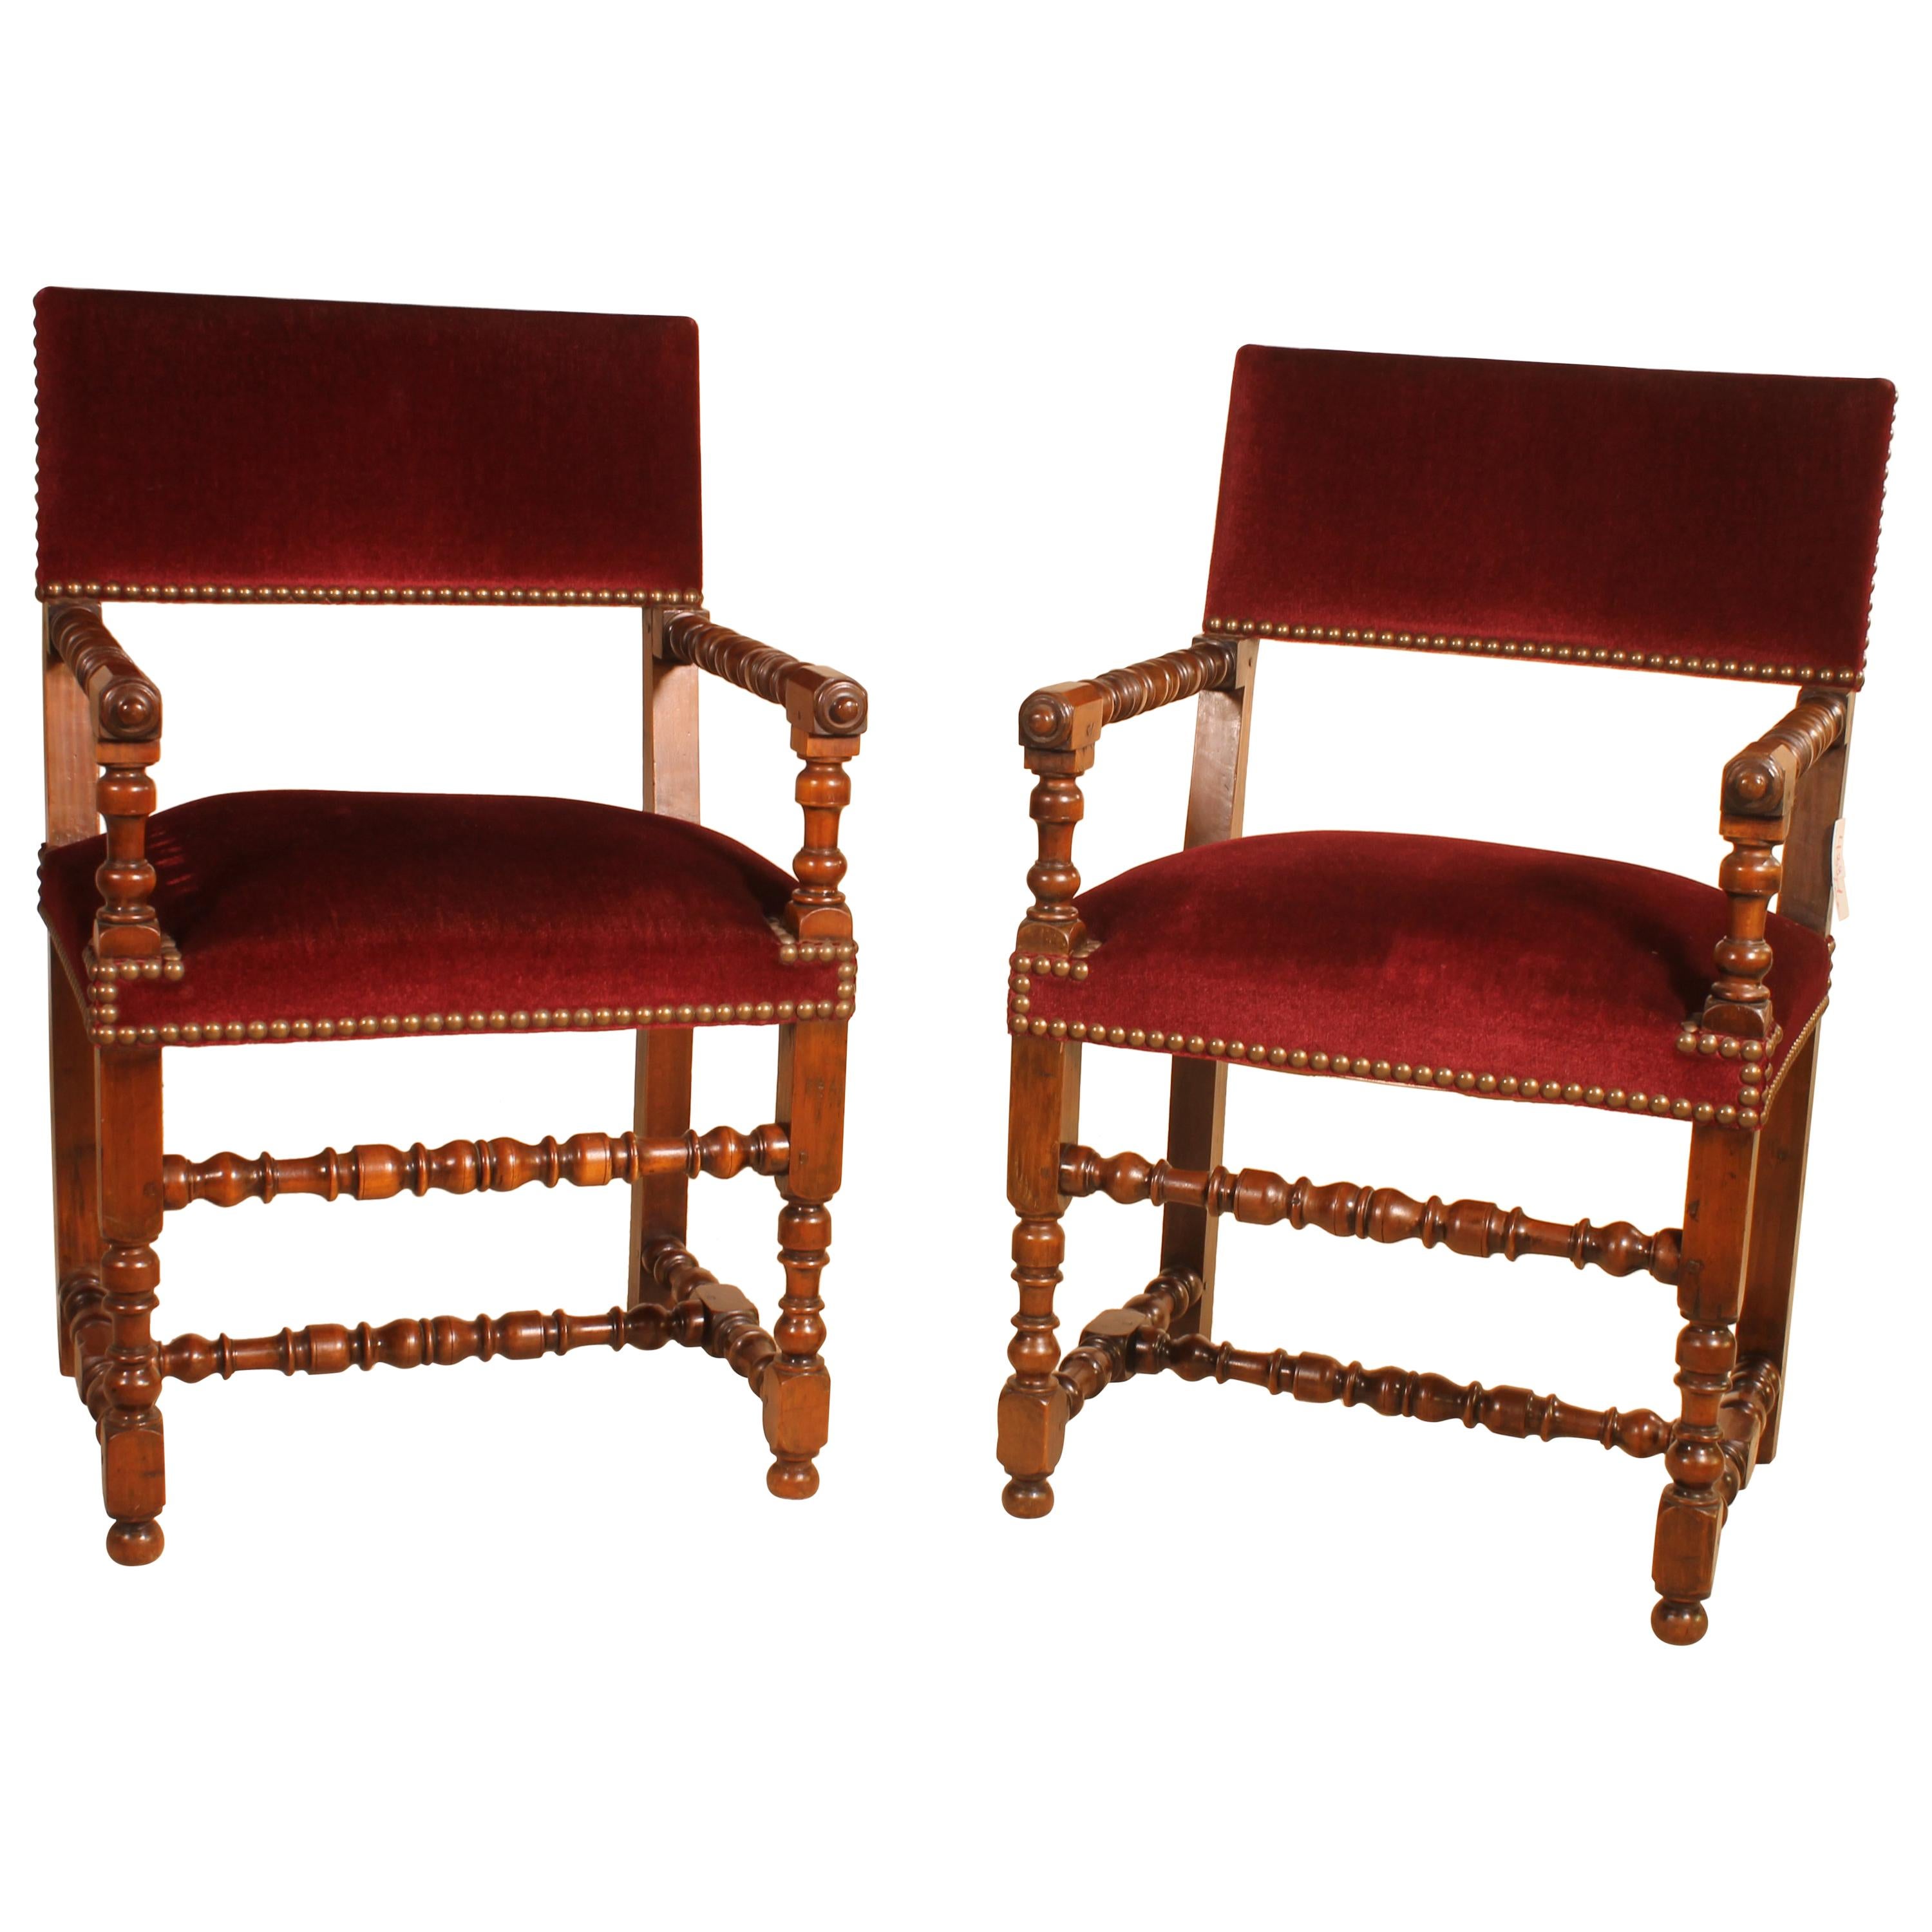 Pair of French Walnut Armchairs Louis XIII Style 19th Century